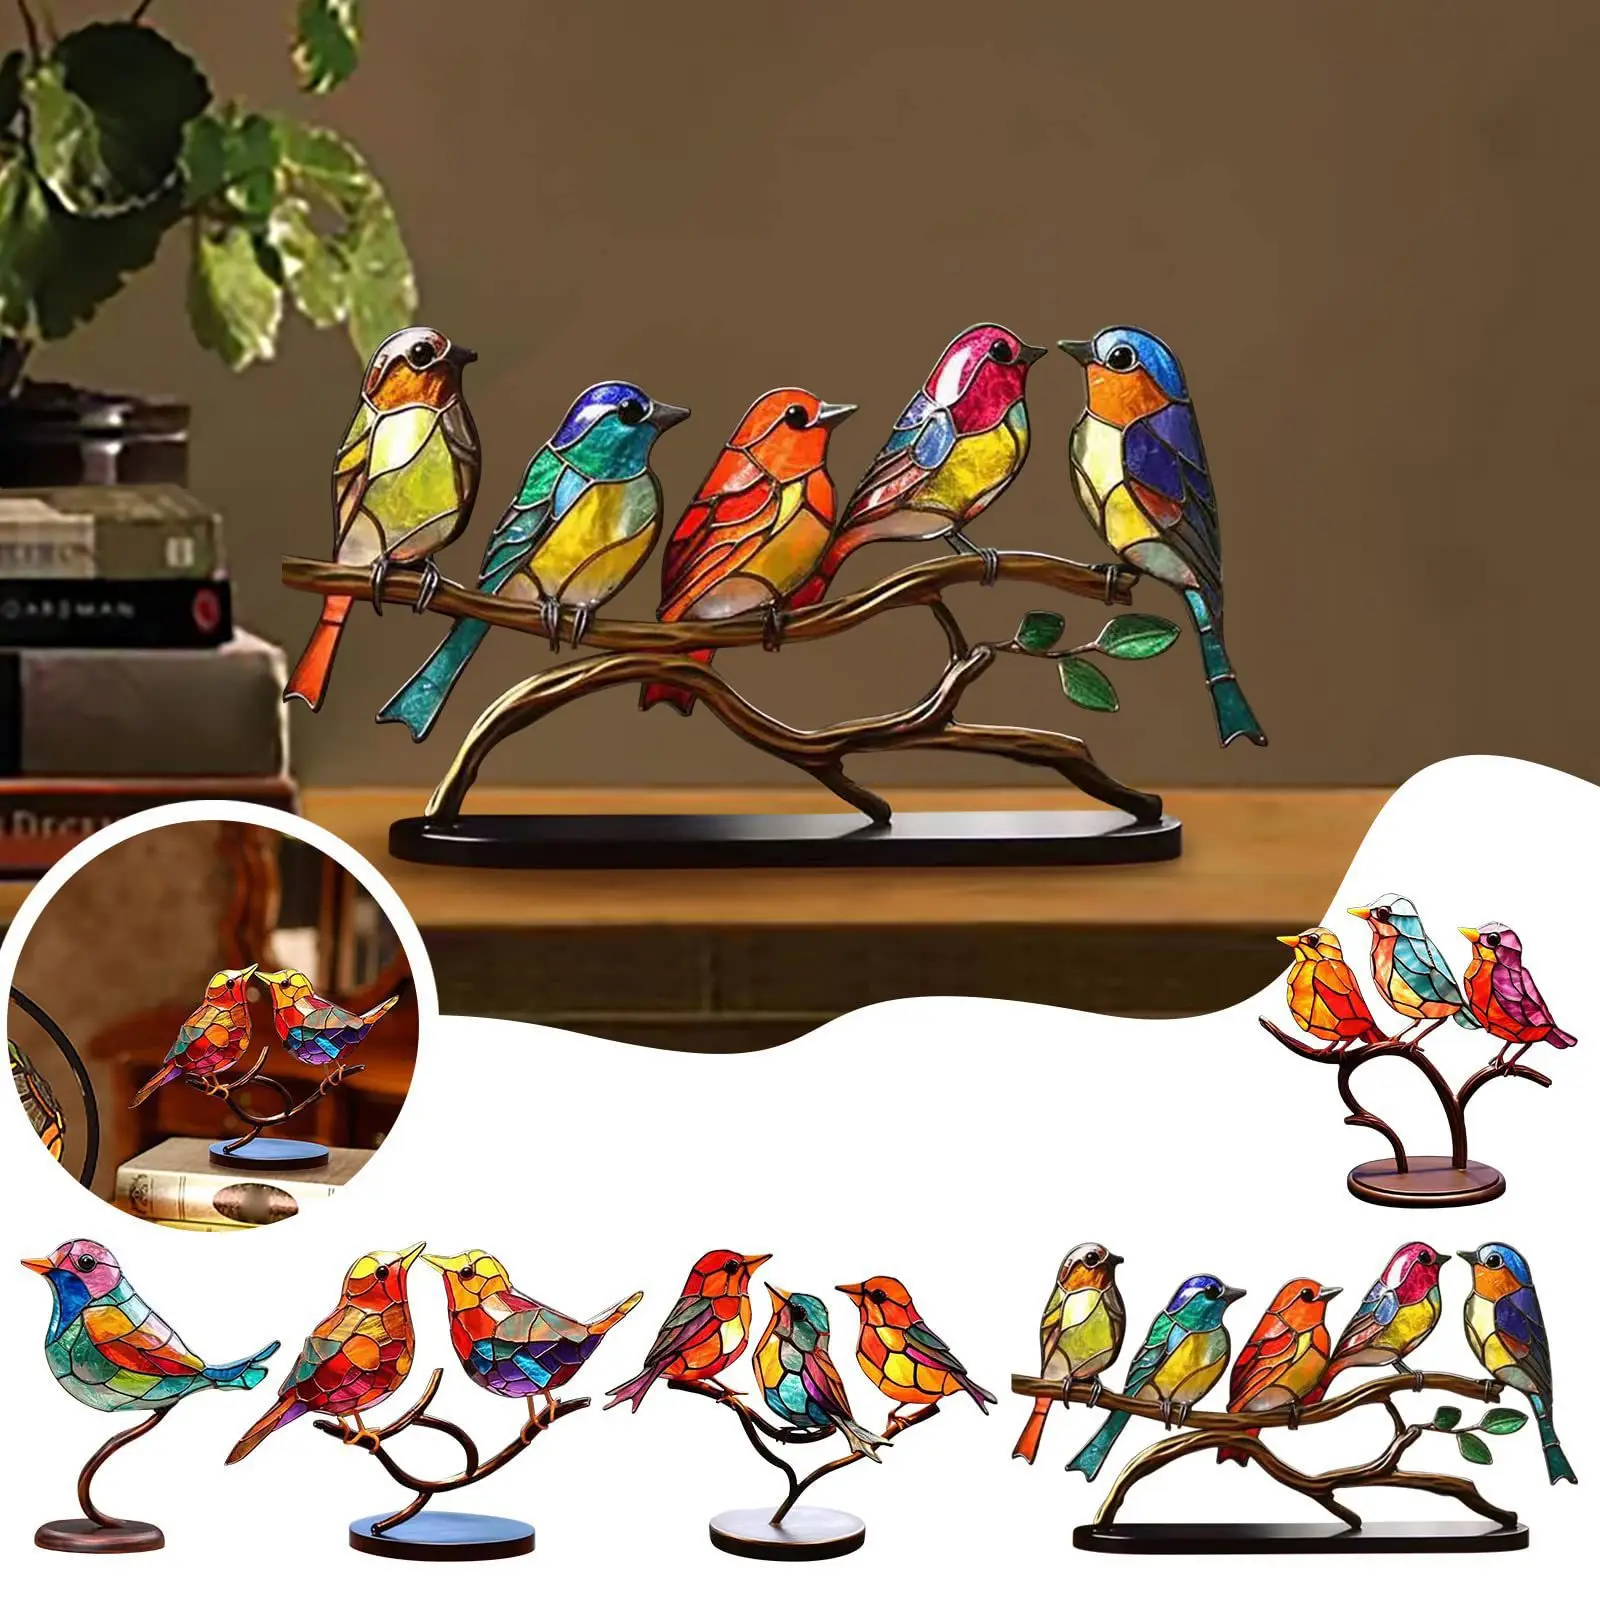 

Stained Birds on Branch Iron Double Colored Birds Decorative Figurines Desktop Ornaments Metal Hummingbird Crafts for Home Decor